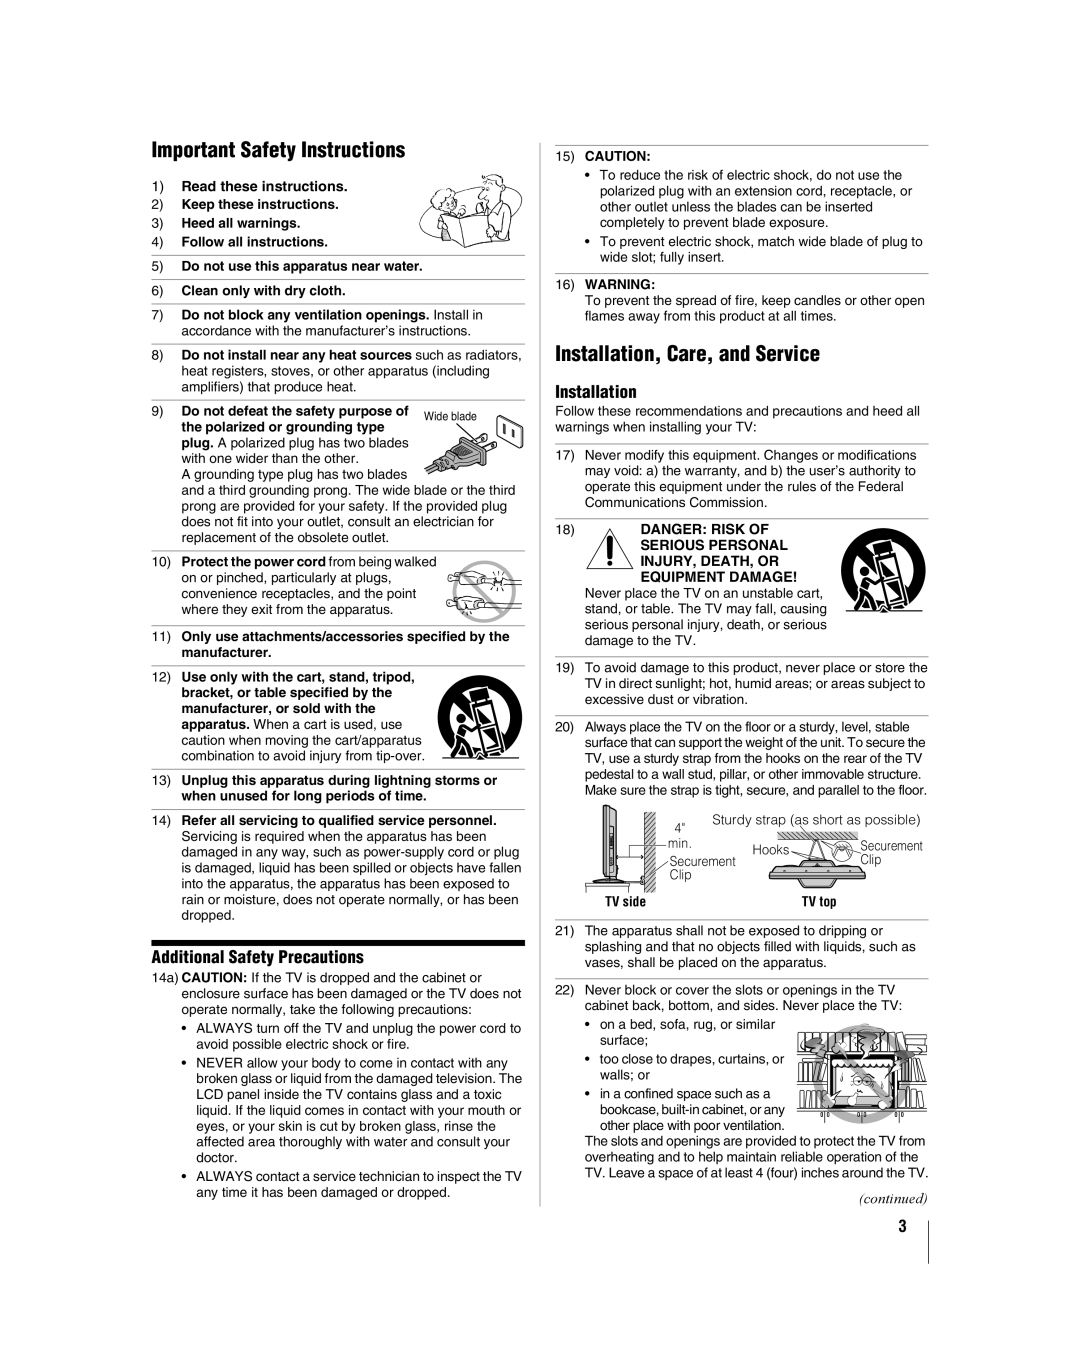 Toshiba 46XF550U Important Safety Instructions, Installation, Care, and Service, Additional Safety Precautions, continued 